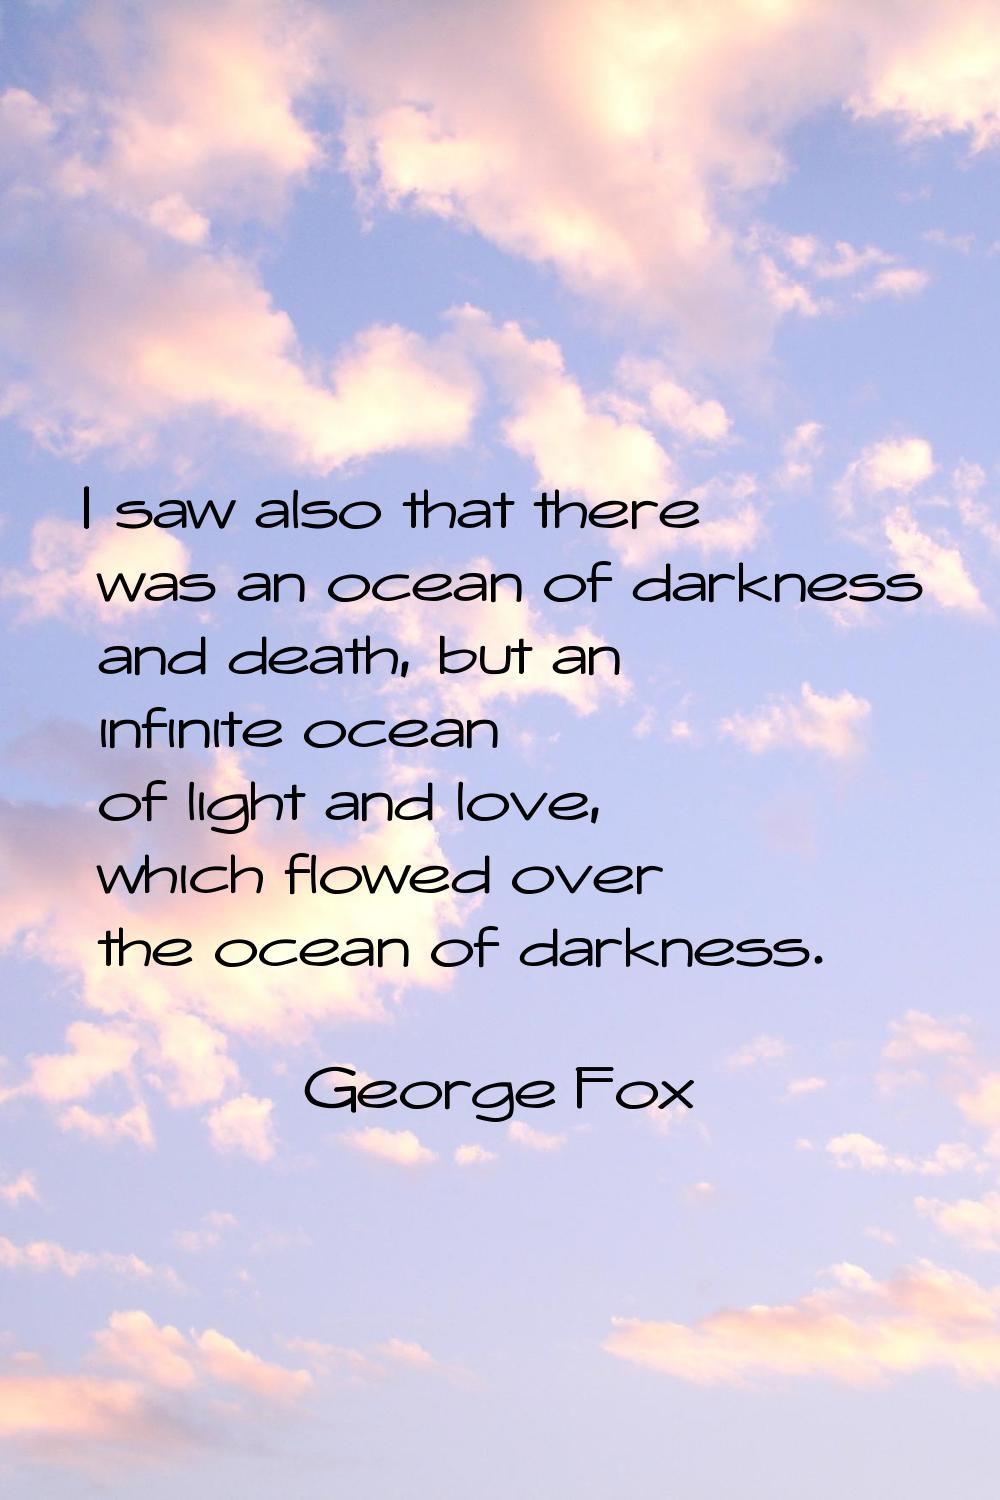 I saw also that there was an ocean of darkness and death, but an infinite ocean of light and love, 